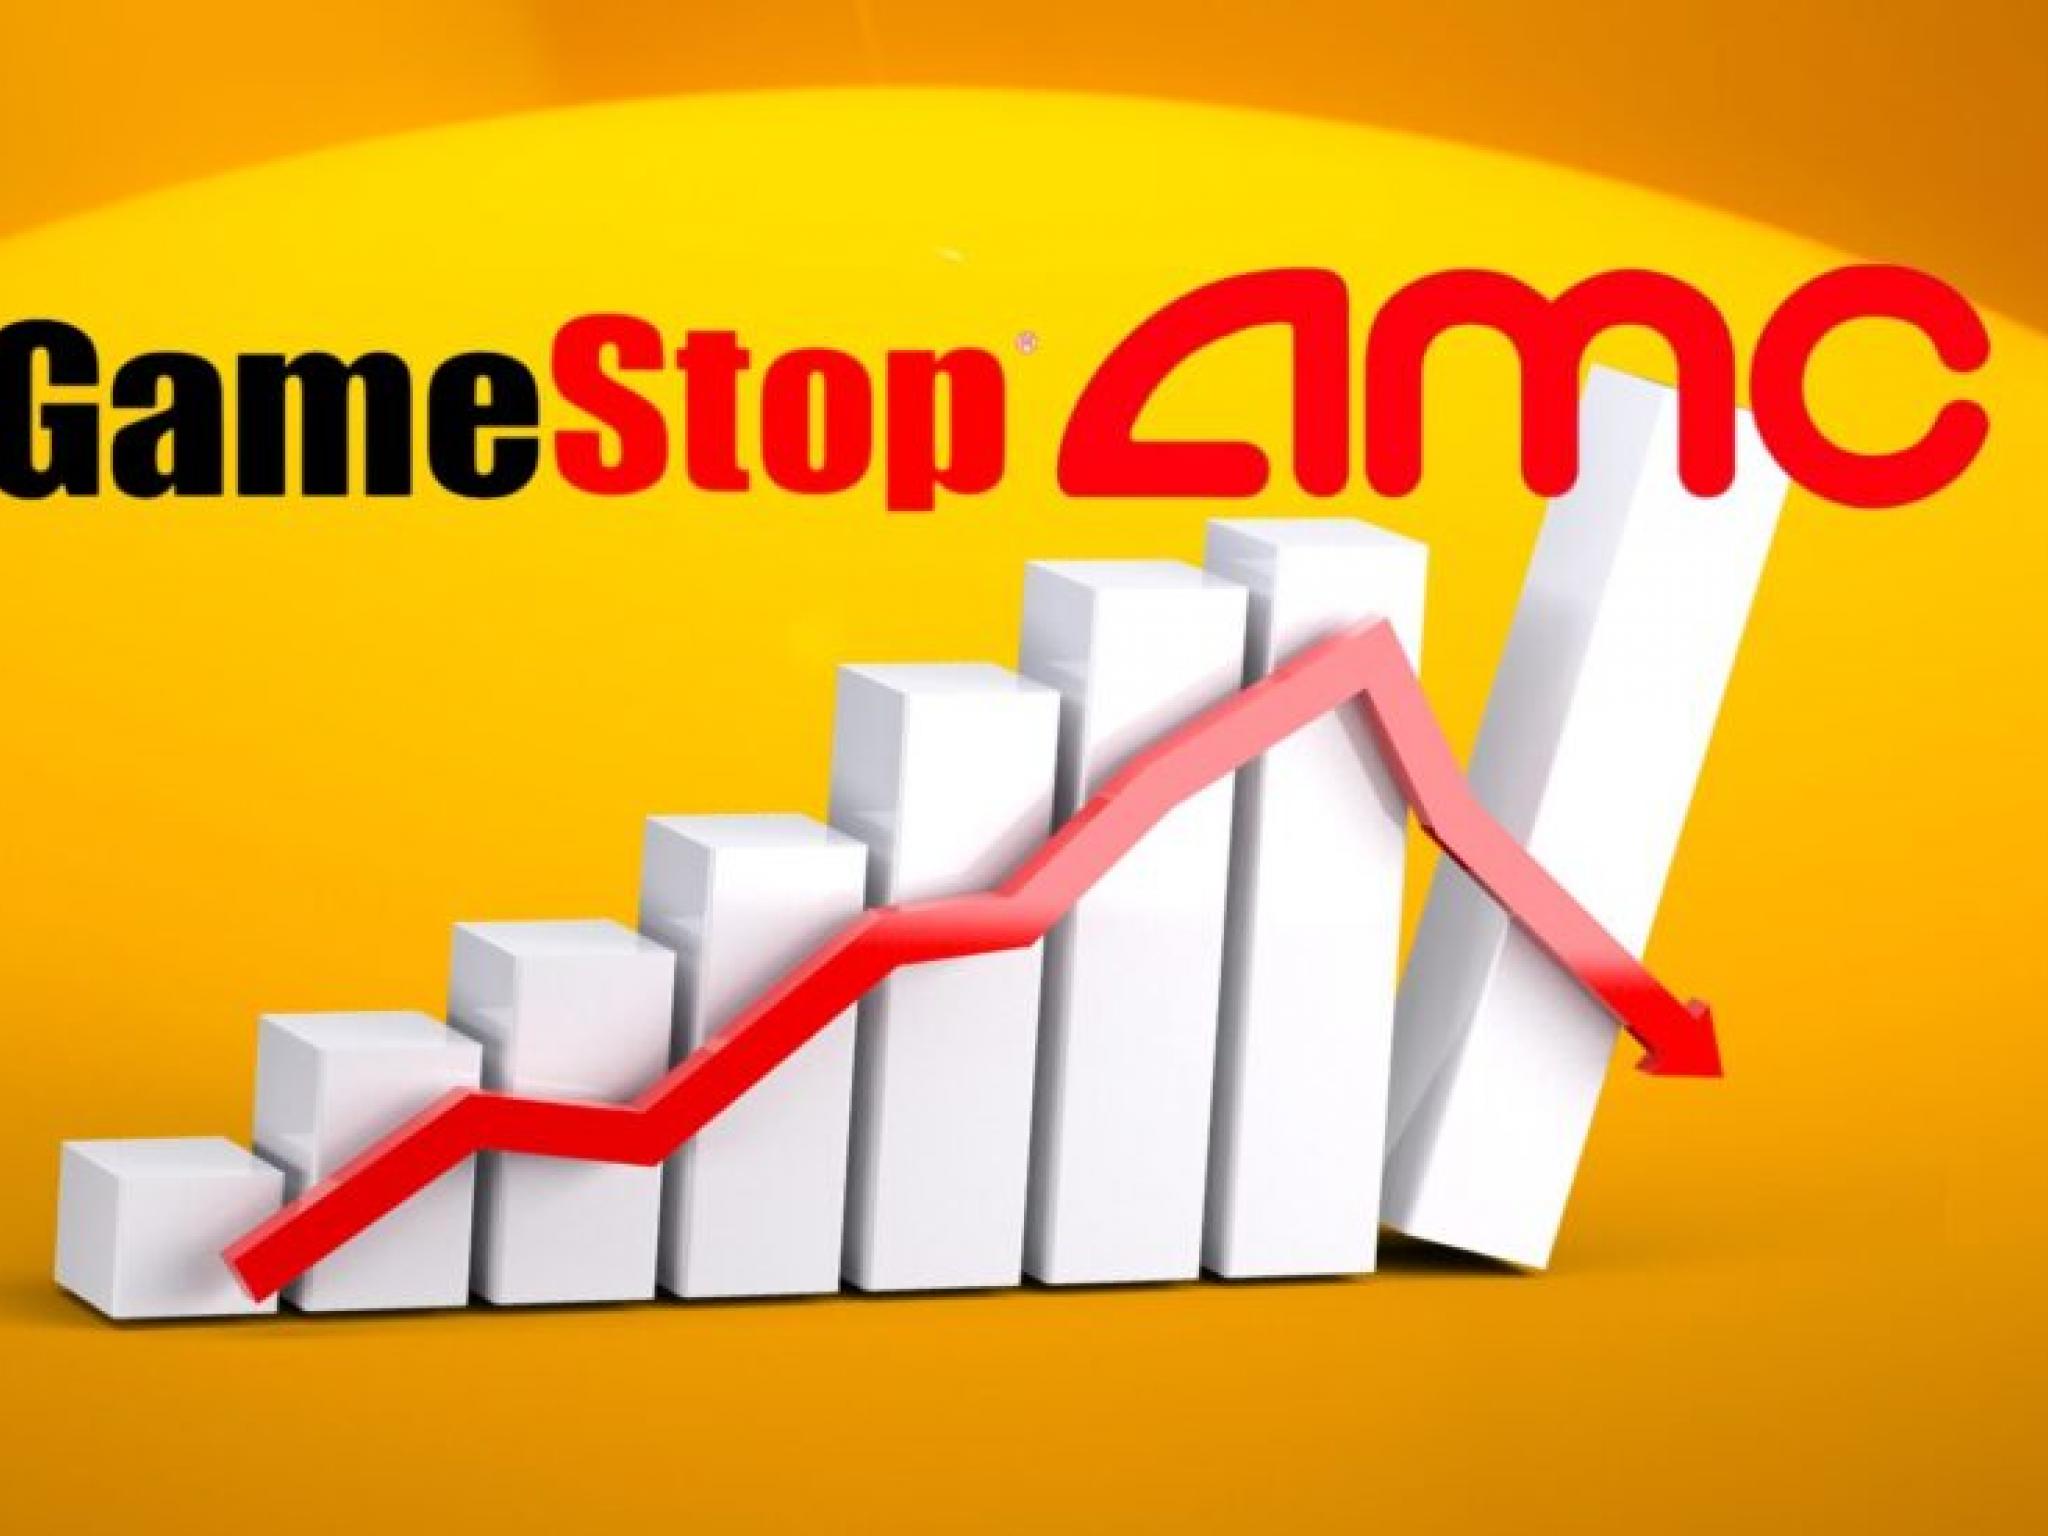  whats-going-on-with-gamestop-shares-today 